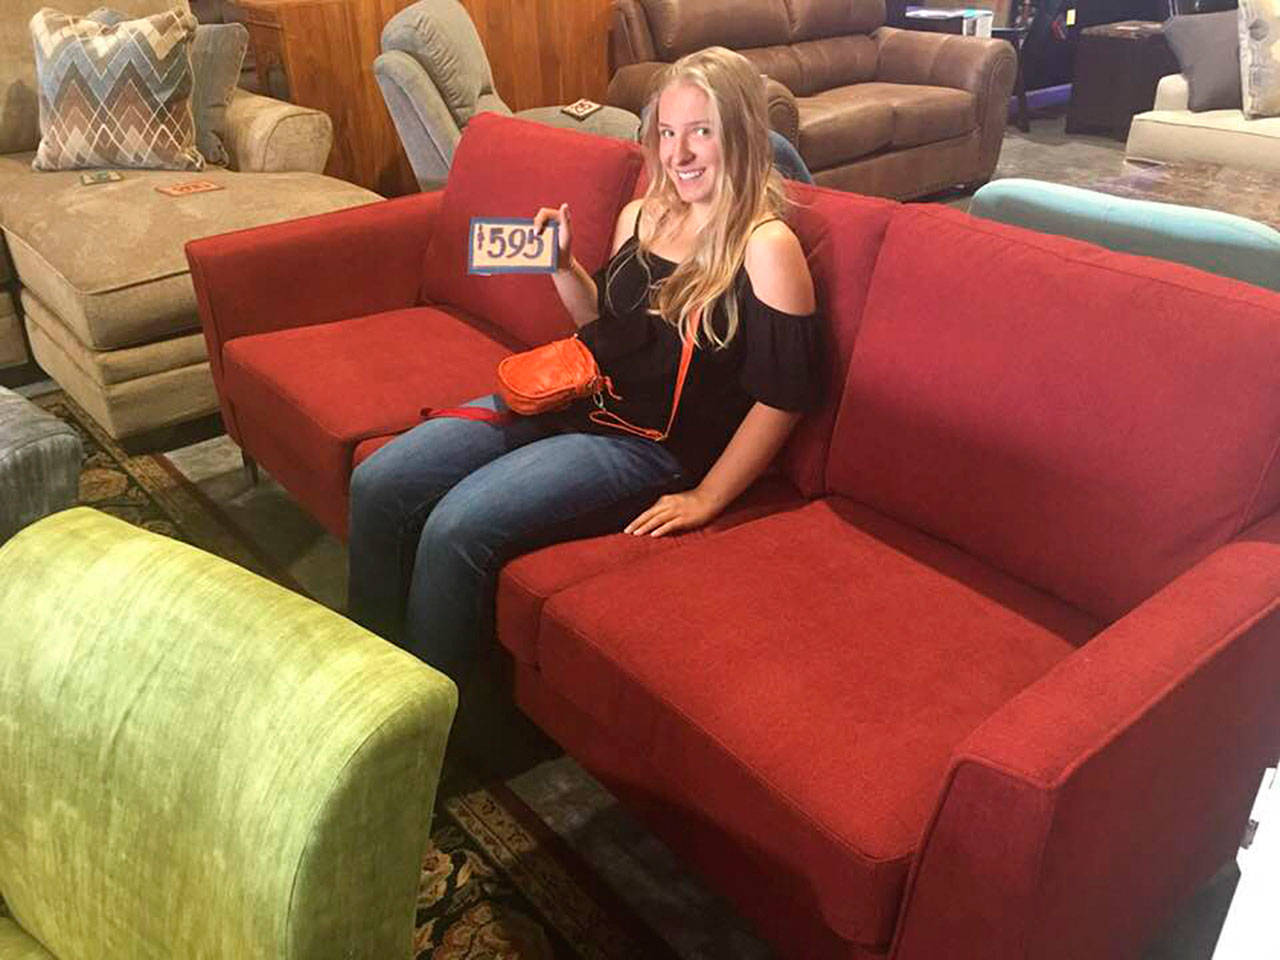 The “Night at the Museum” fundraiser event Sunday is raising monies for the Robby Streett Legacy Fund to purchase new furniture for the Sequim High School library, in honor of Robby Streett. Annie Armstrong, one of the organizers of the event, sits on a couch at The Warehouse in Port Angeles in search of new furniture.